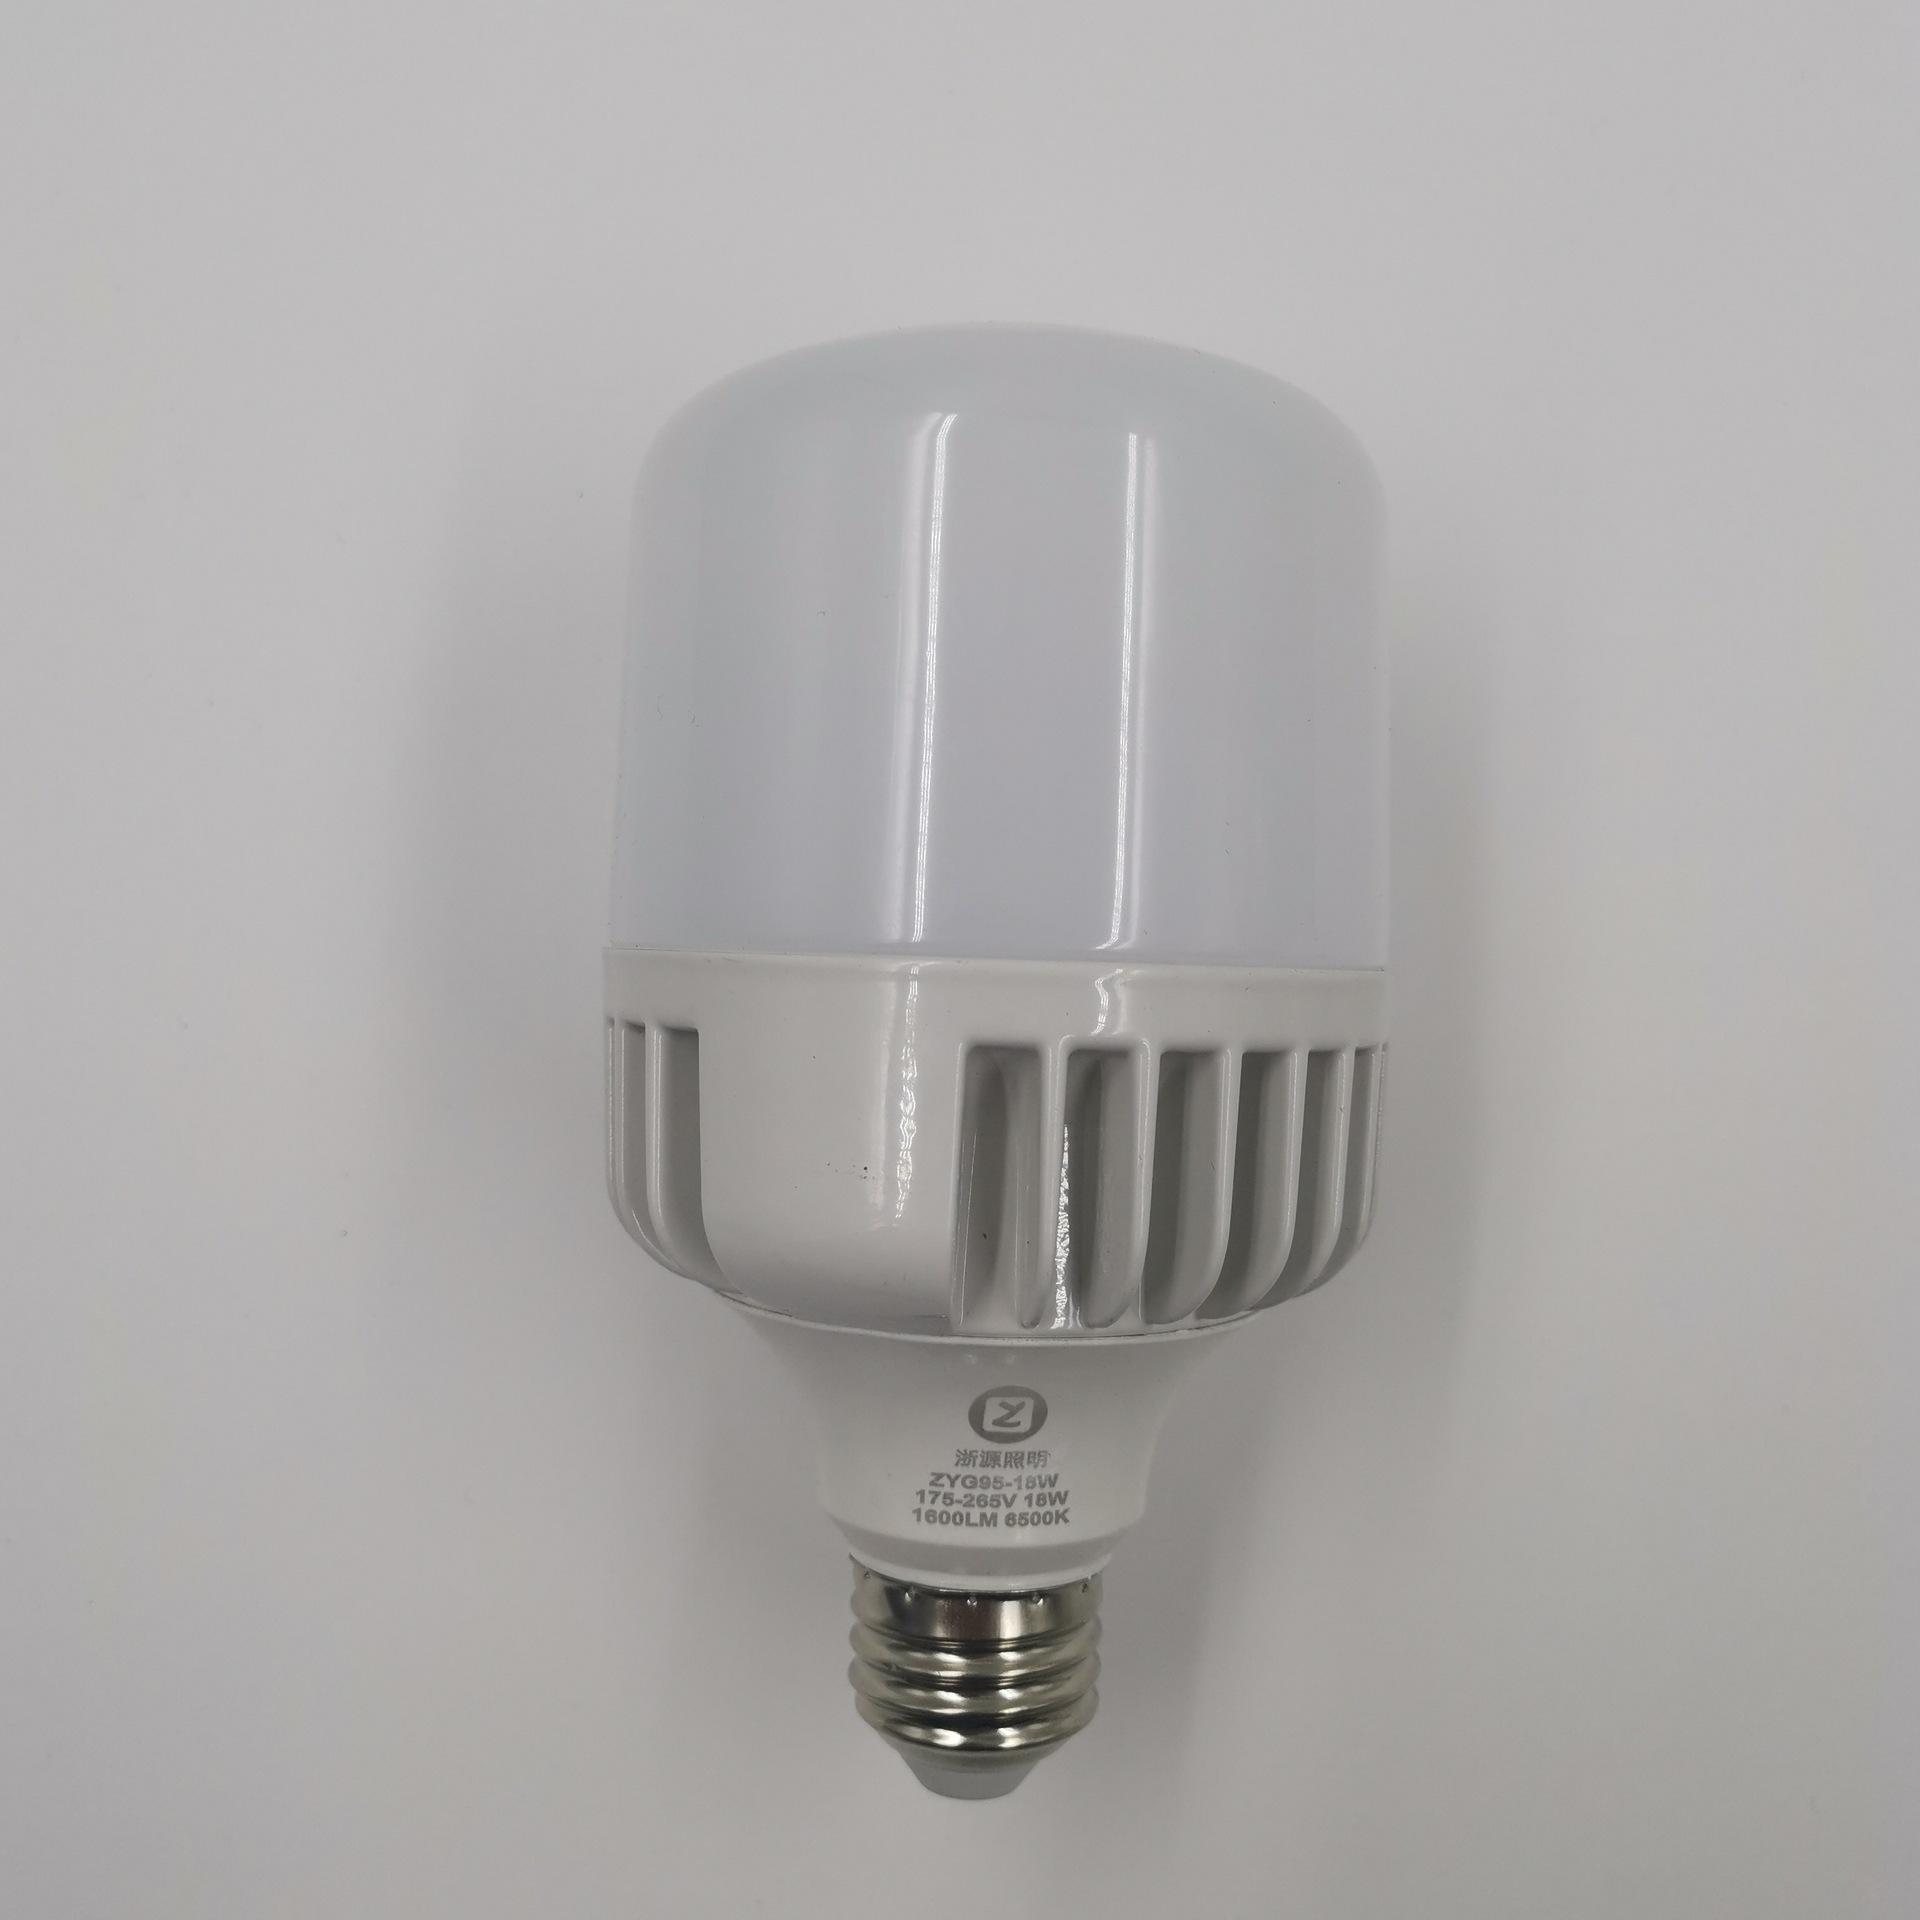 Professional Led Bulb Plastic Mold Manufacturer, Low Price Plastic Blowing Injection Led Bulb Mould Light